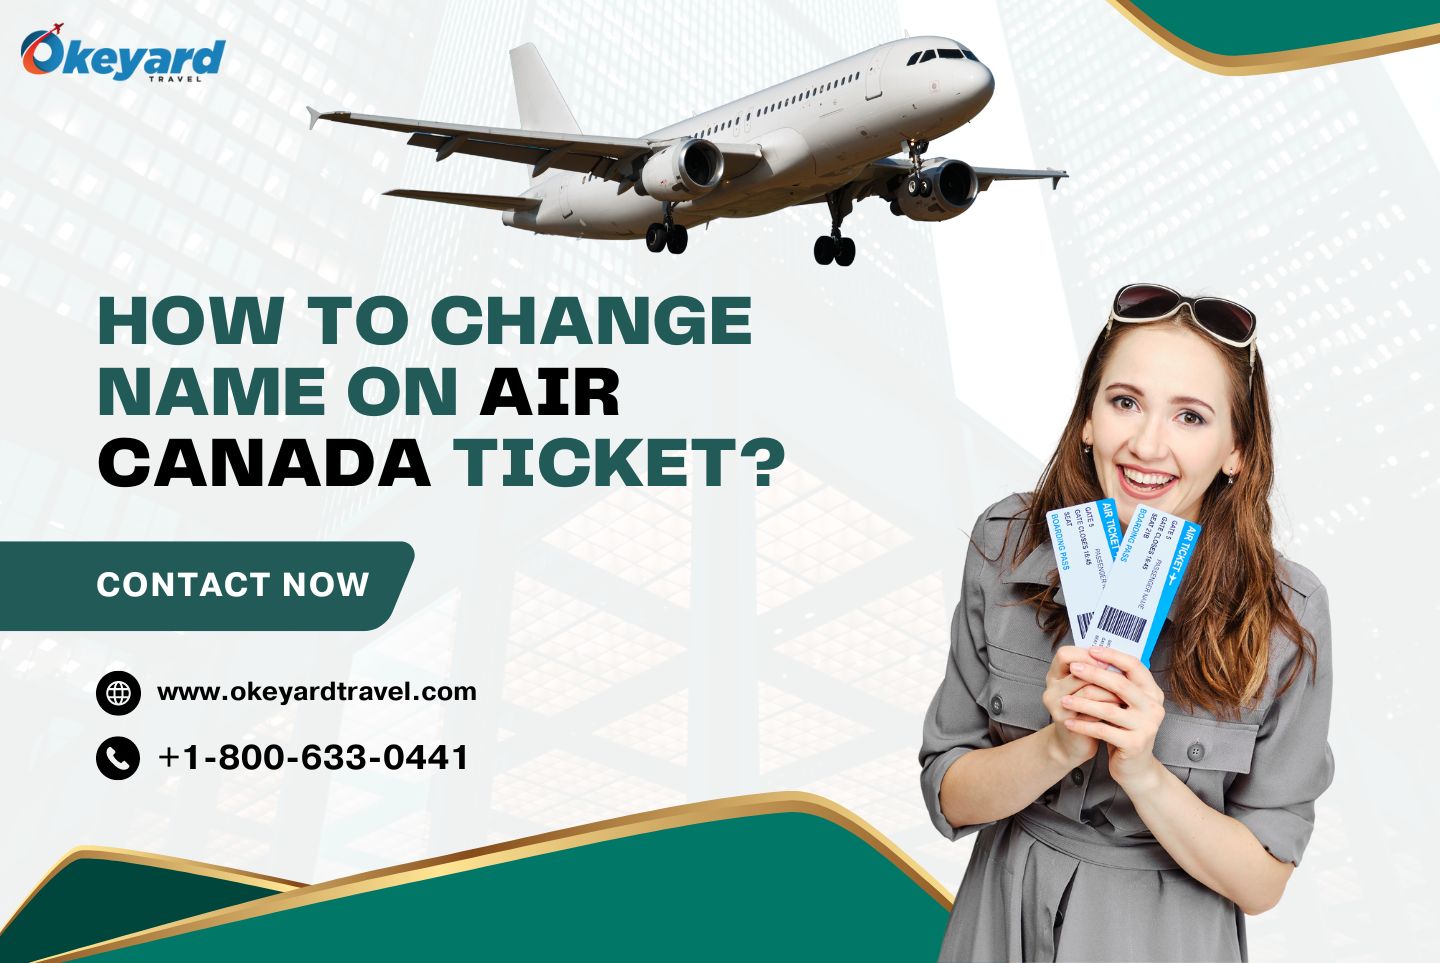 How To Change Name On Air Canada Ticket?